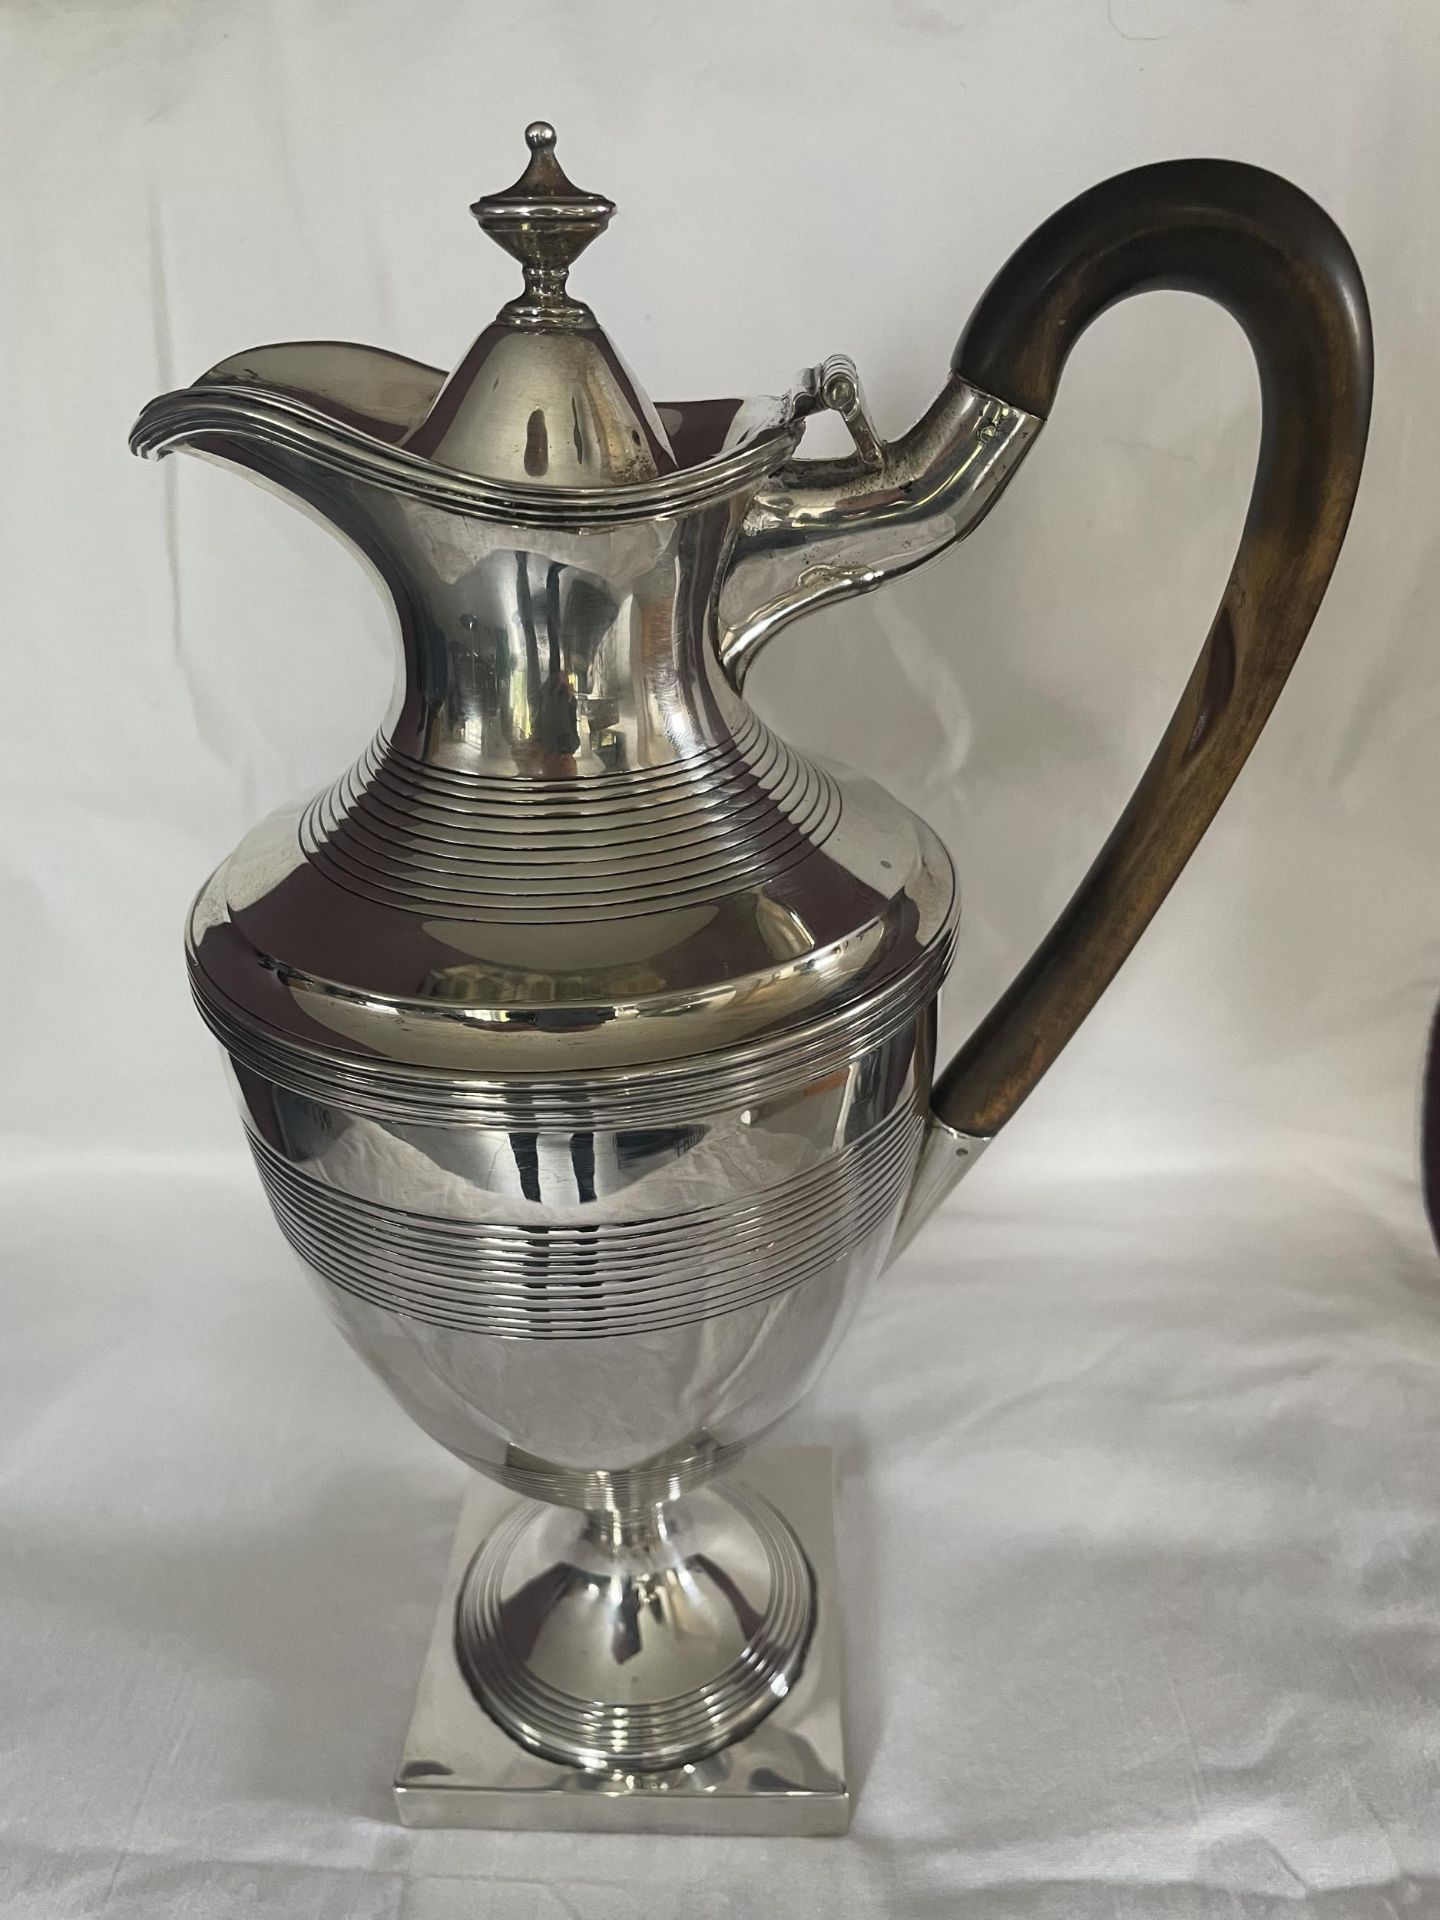 A HALLMARKED 1819 LONDON SILVER CLARET JUG WITH FRUIT WOOD HANDLE, MAKER C S HARRIS AND SONS LTD - - Image 6 of 7